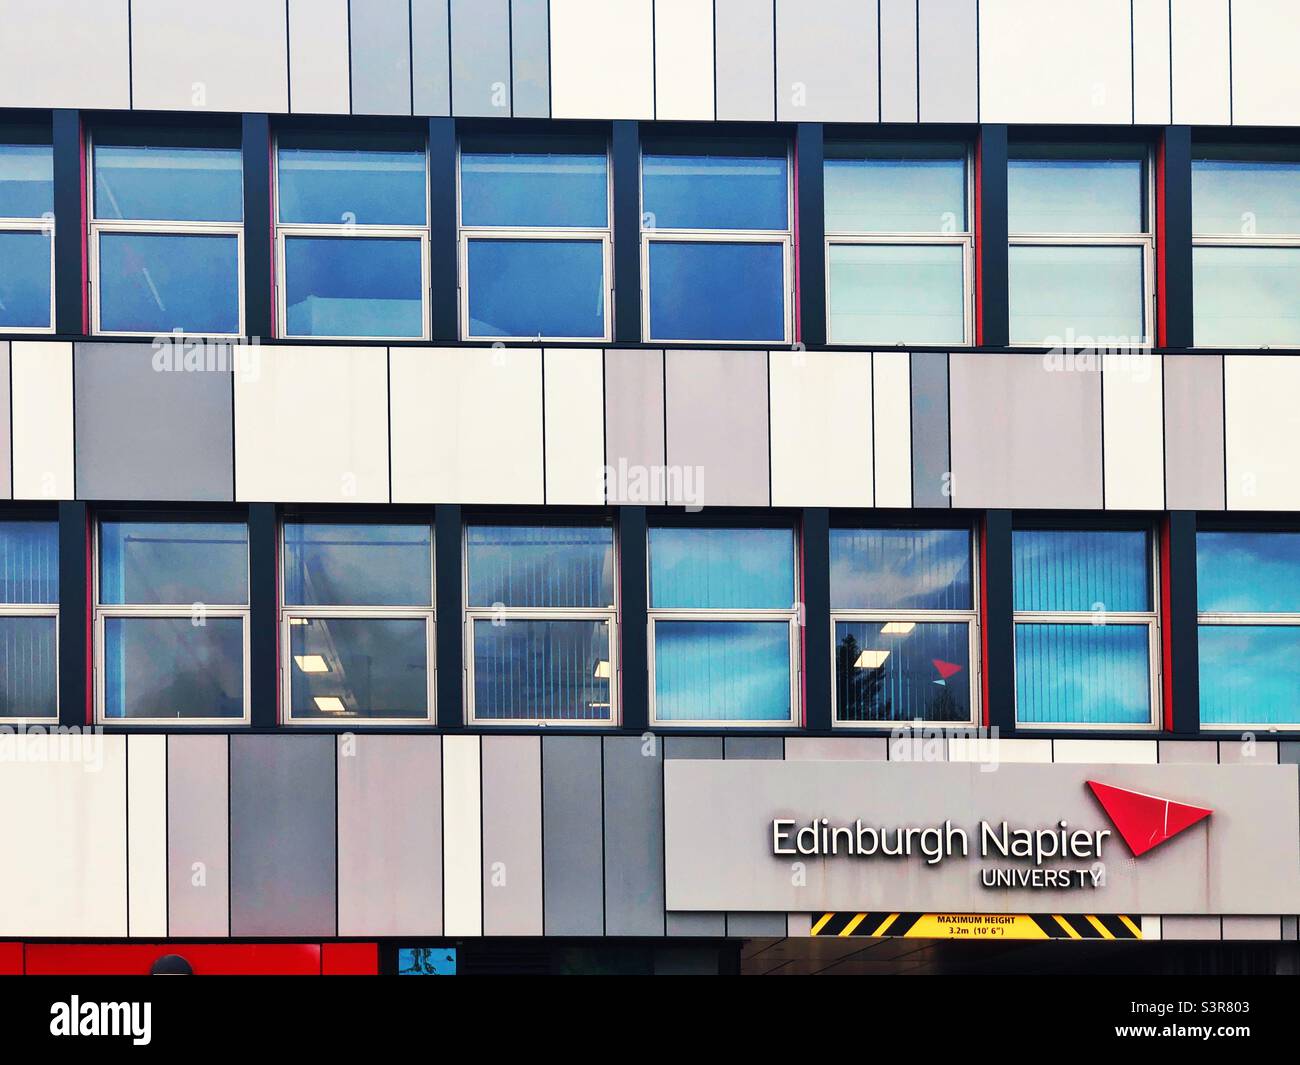 Edinburgh Napier University Merchiston campus. It is home to the Arts and Creative Industries, computing and engineering. Stock Photo